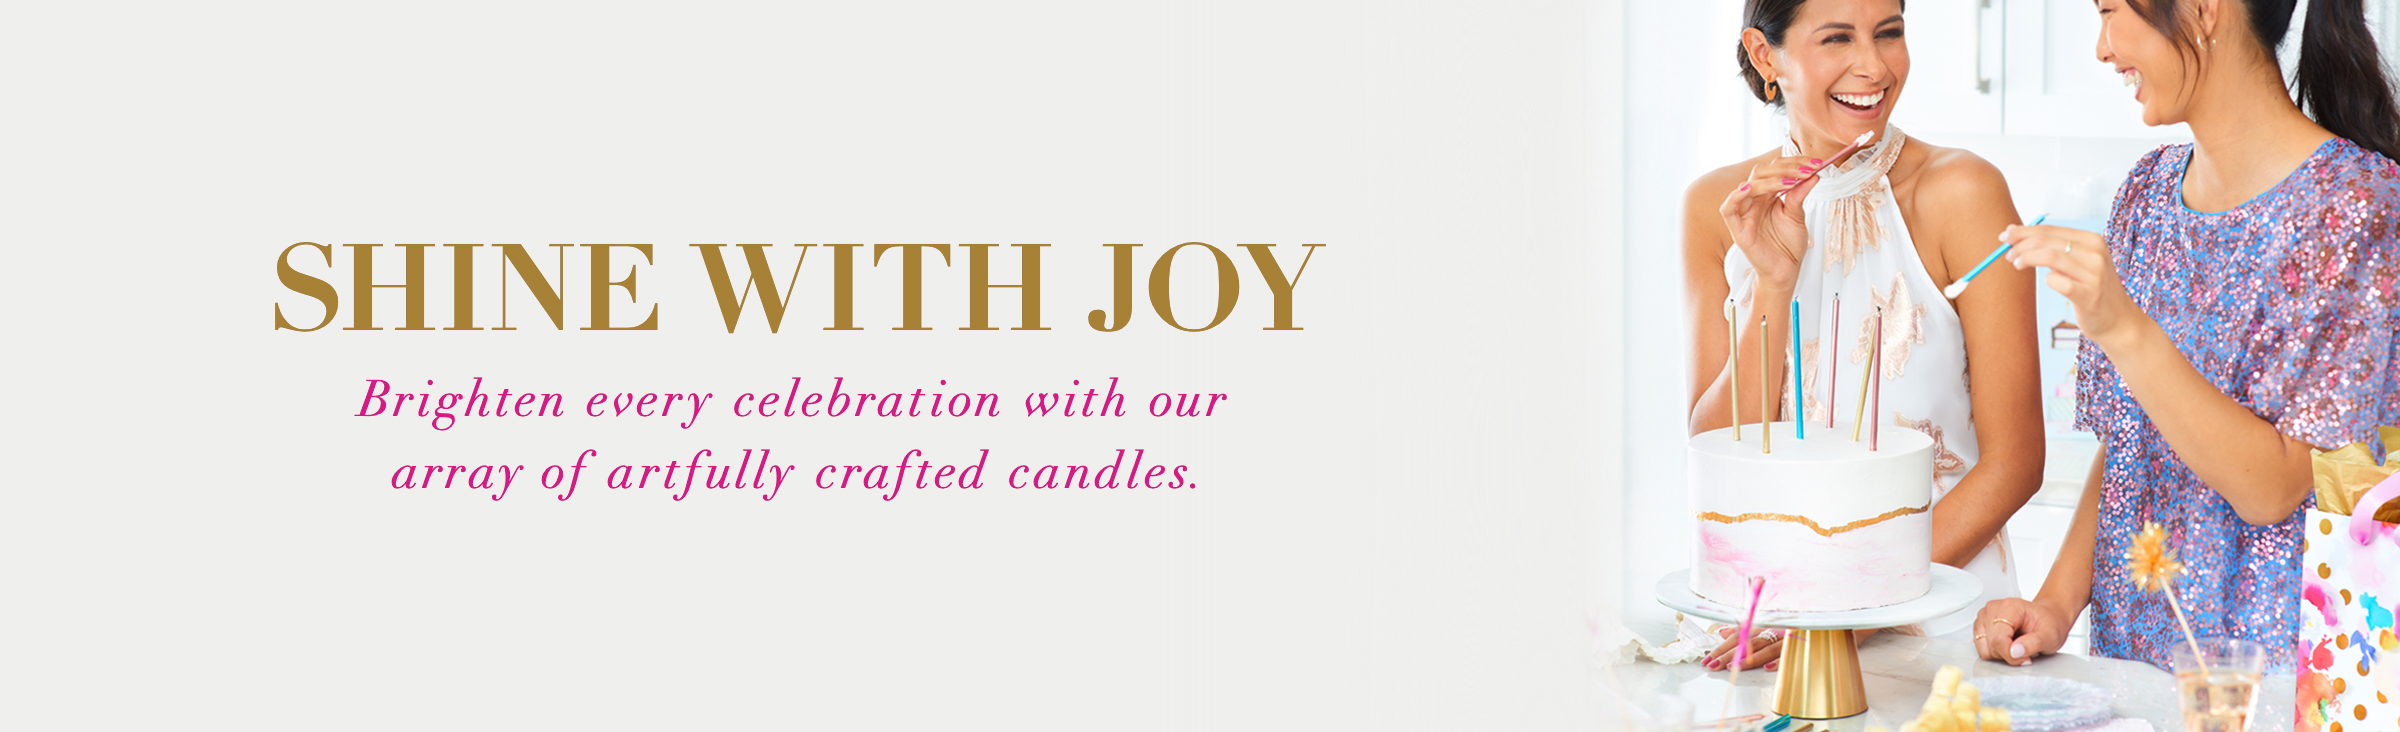 Shine with Joy Brighten every celebration with our array of artfully crafted candles